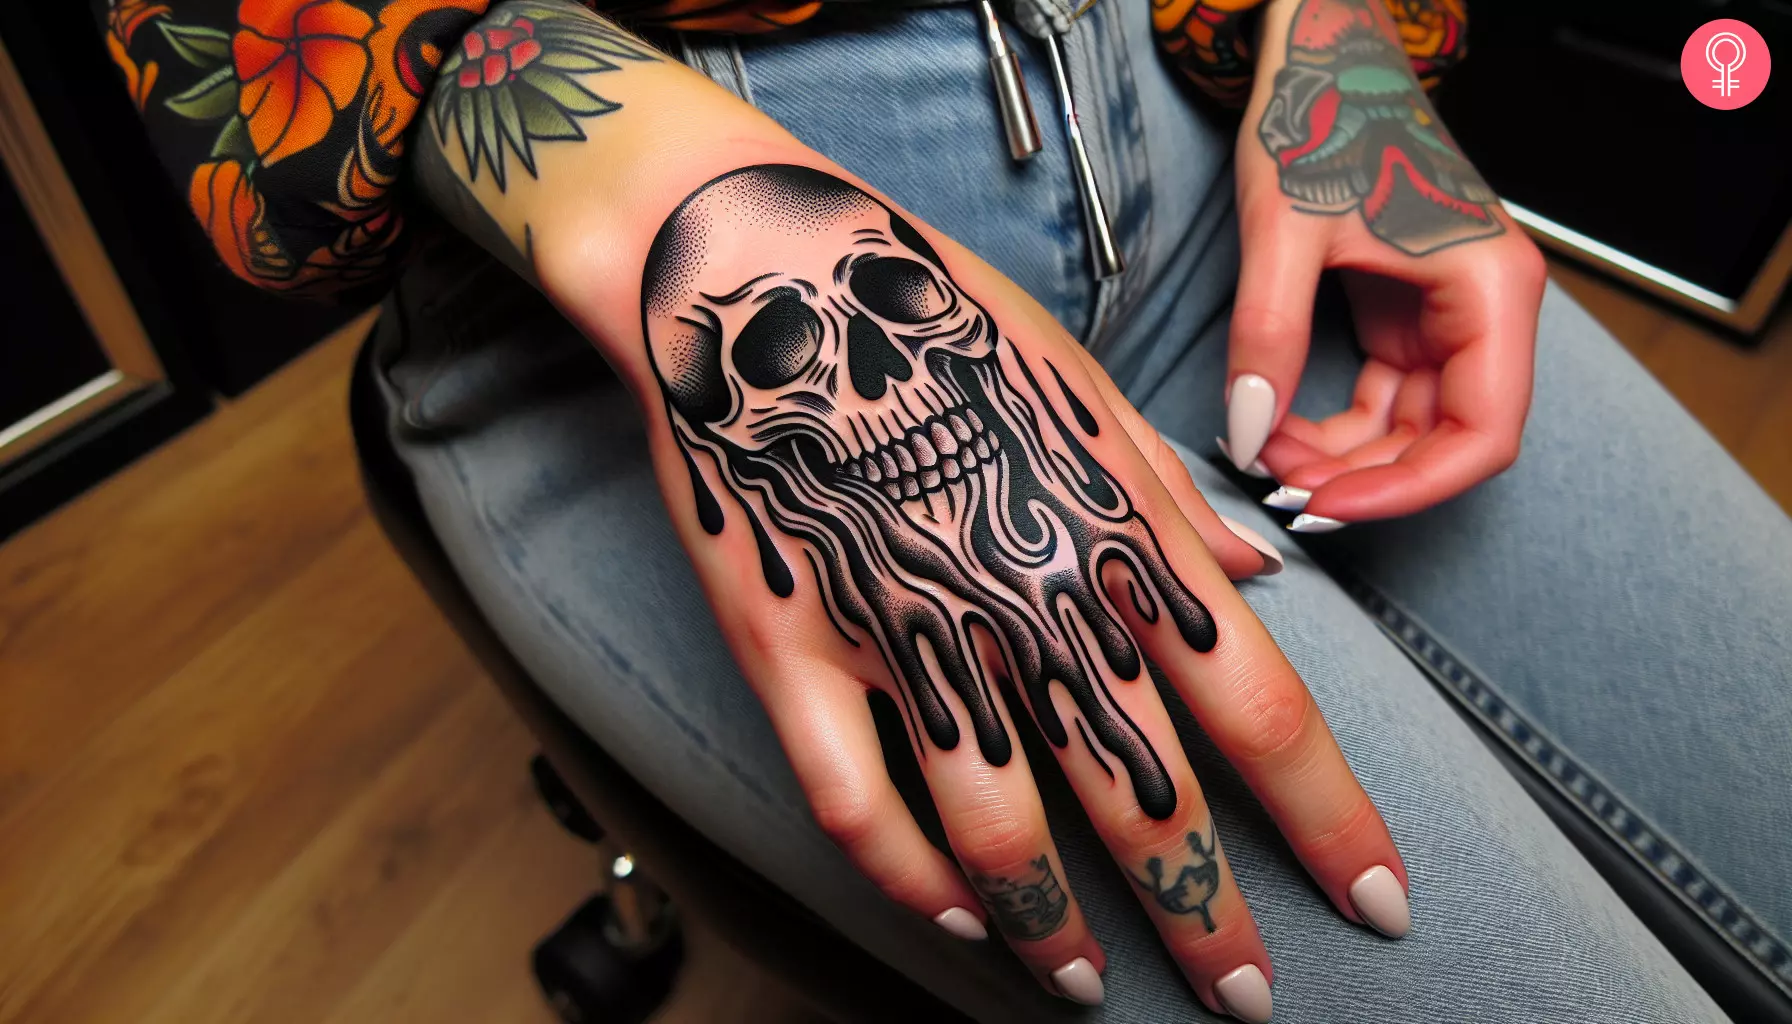 Woman with melting skull tattoo on the back of her palm